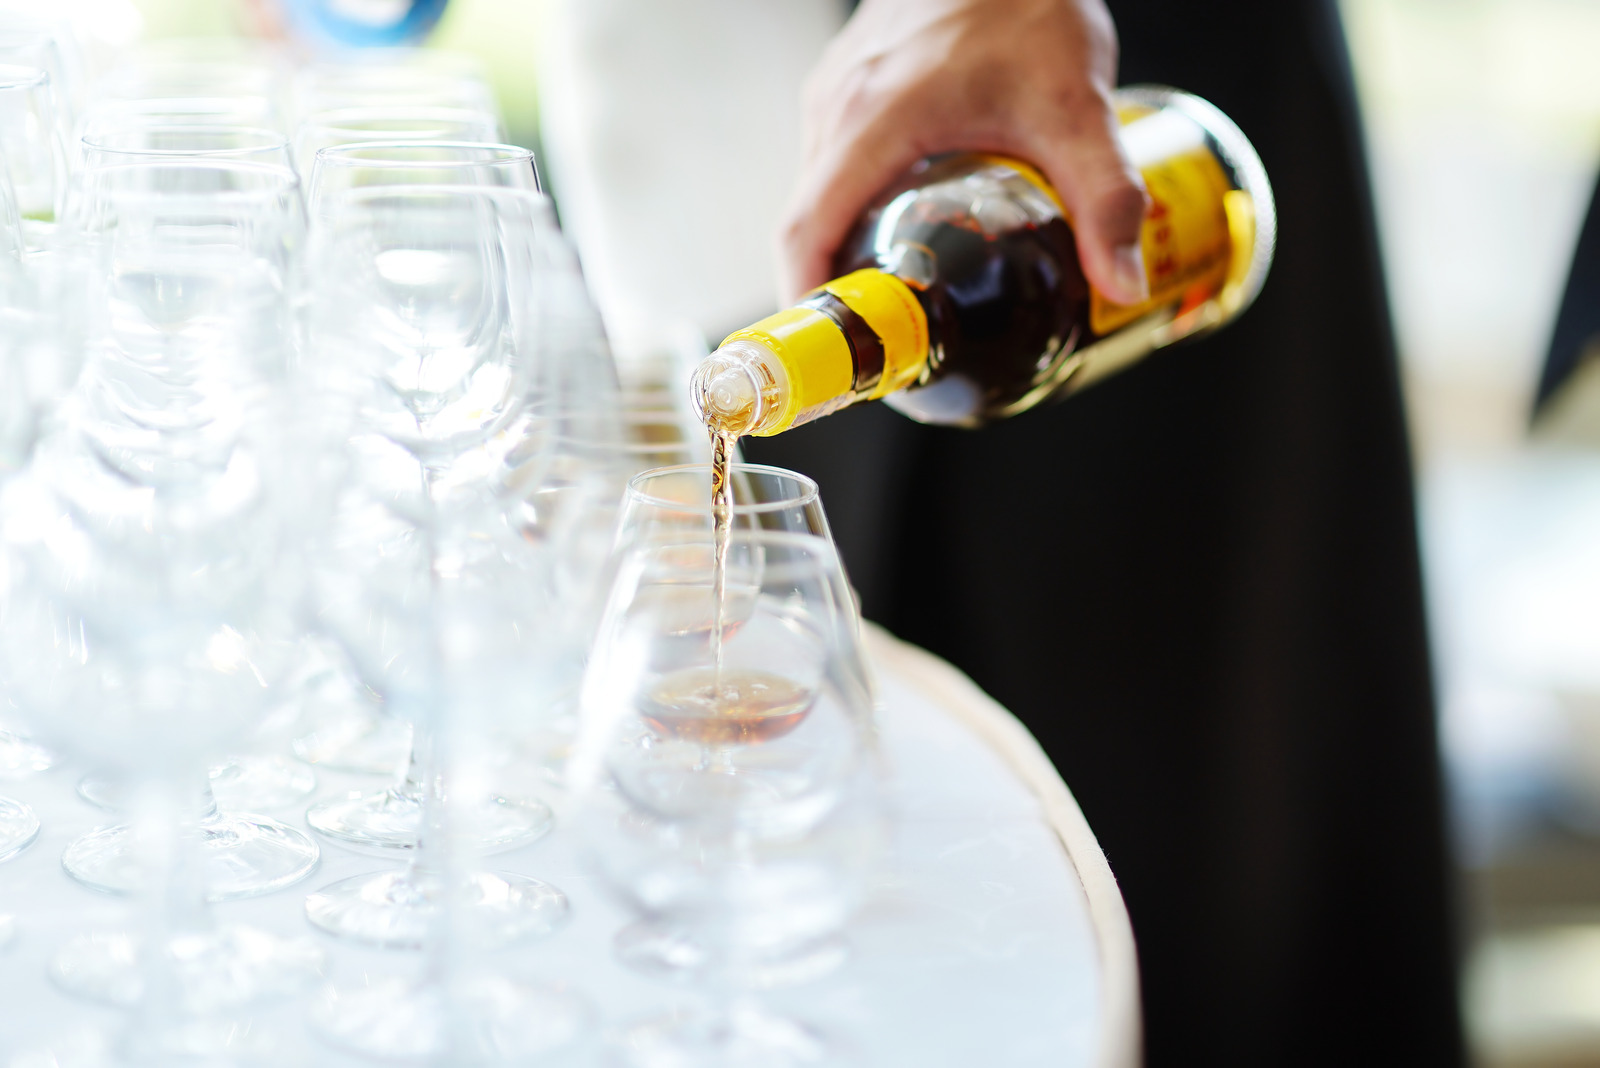 Pouring alcohol into a glasses on a festive event, party or wedding reception